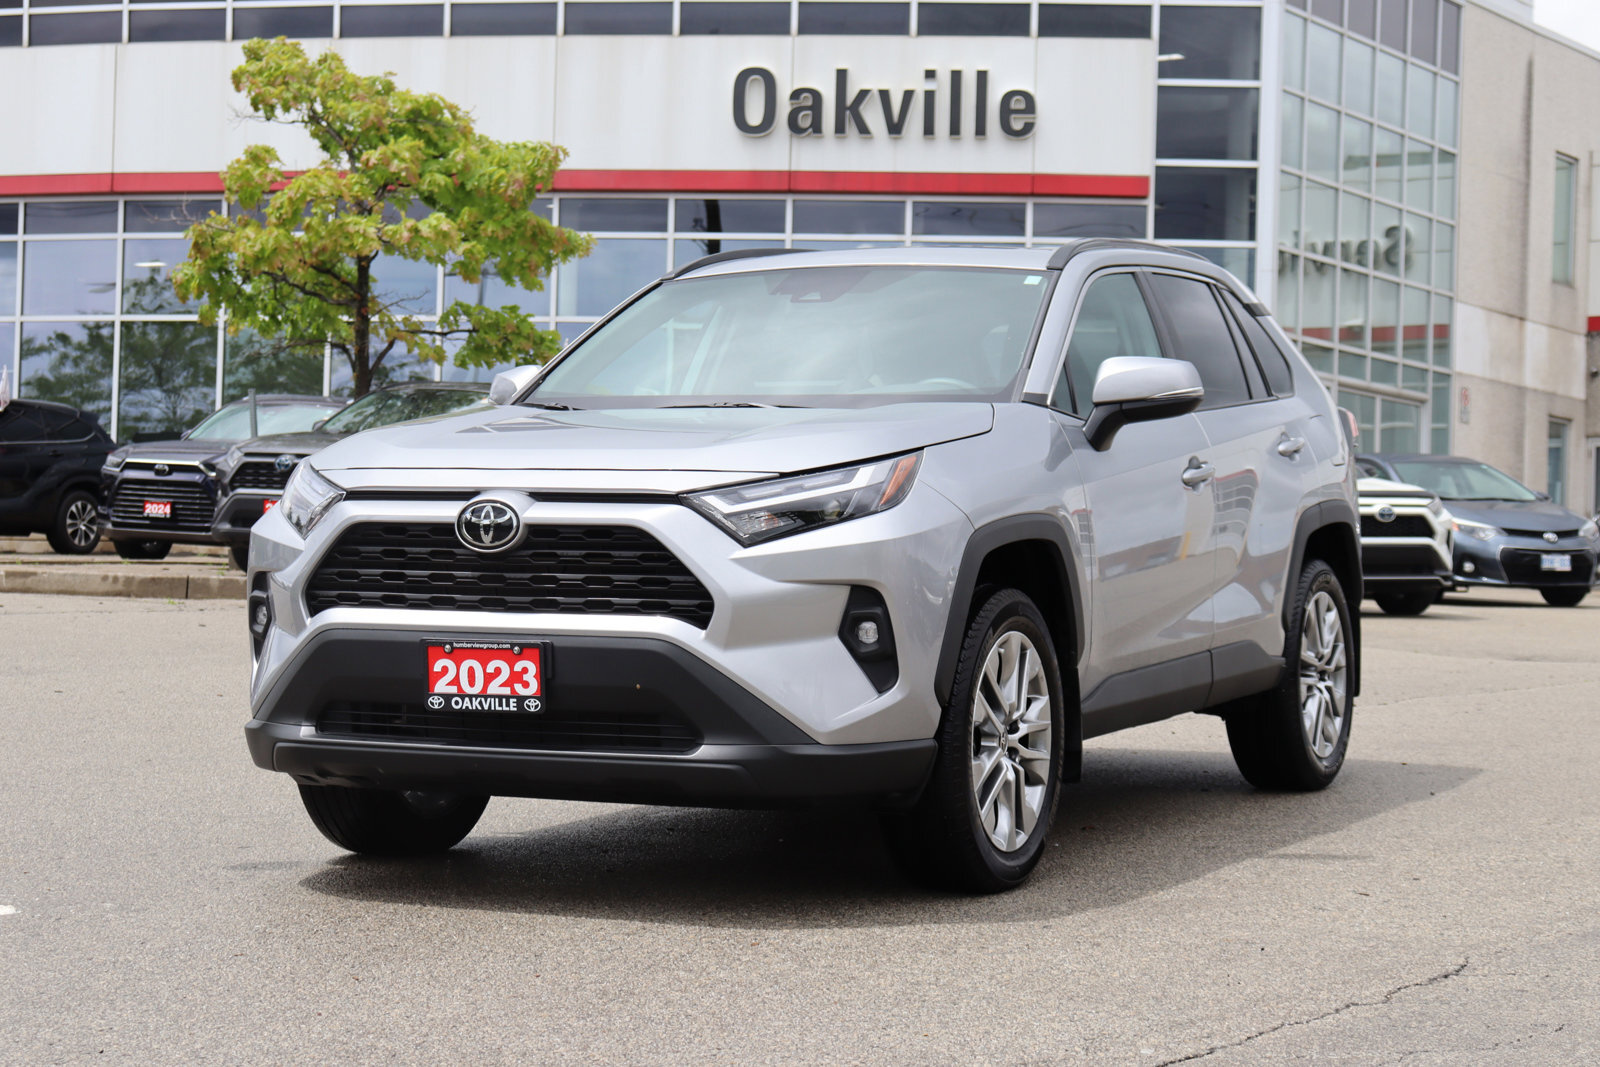 2023 Toyota RAV4 XLE AWD Lease Trade-in 12,348KM Clean Carfax